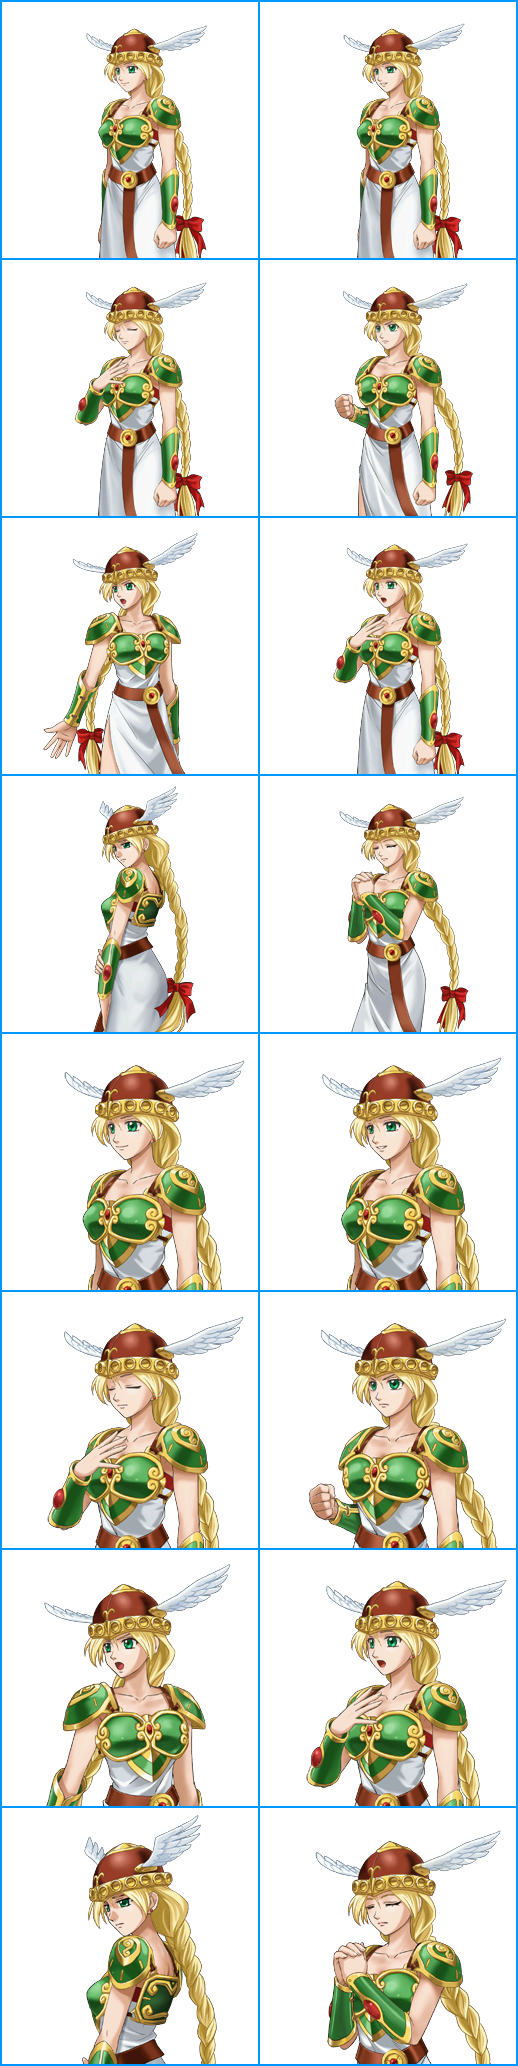 Project X Zone 2 - Valkyrie